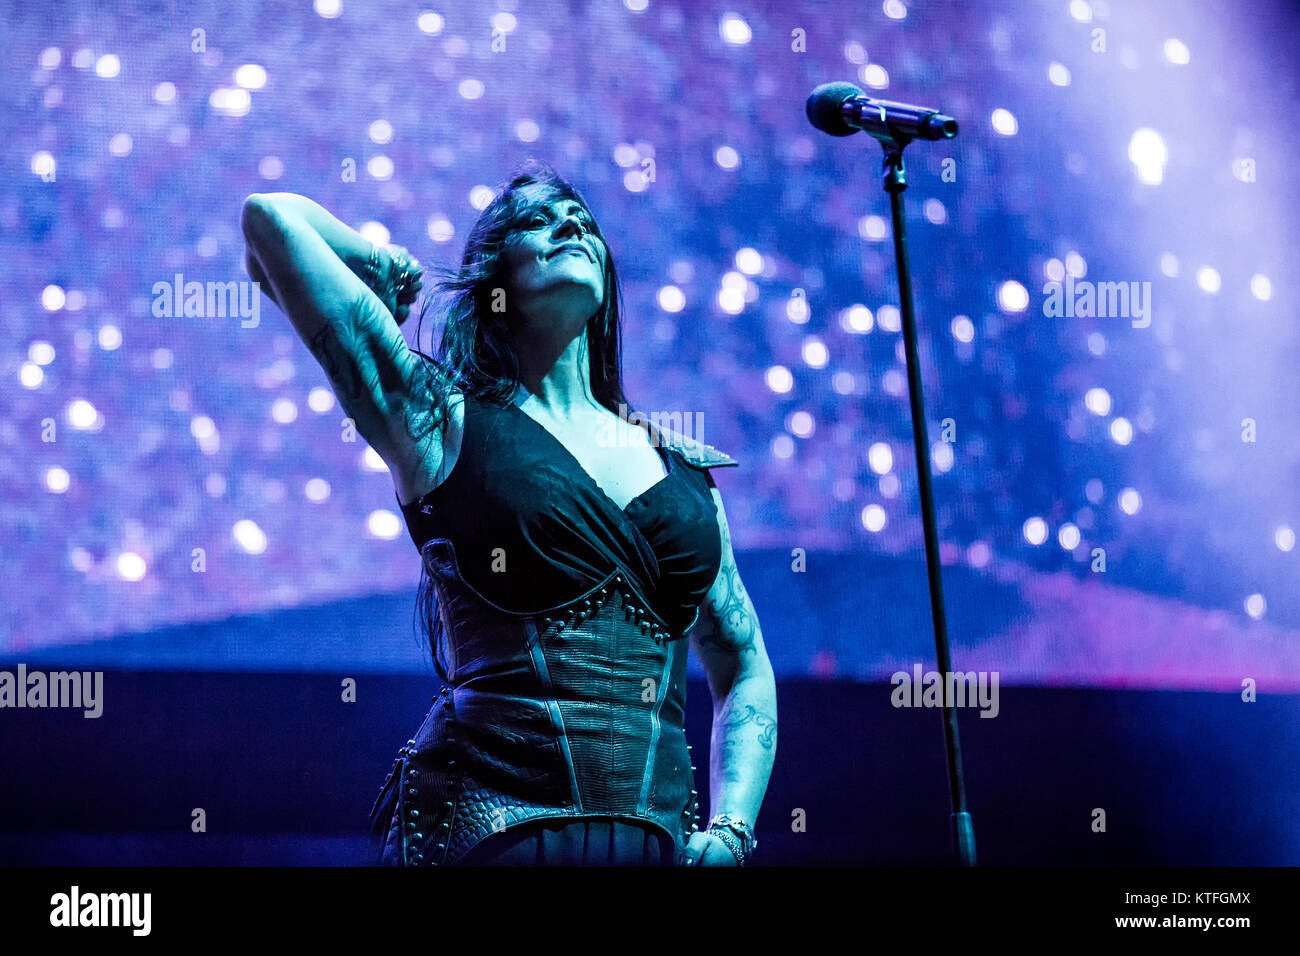 Nightwish, the Finnish symphonic metal band, performs a live concert at the Swedish music festival Bråvalla Festival 2016. Here vocalist Floor Jansen is seen live on stage. Sweden, 02/07 2016. Stock Photo